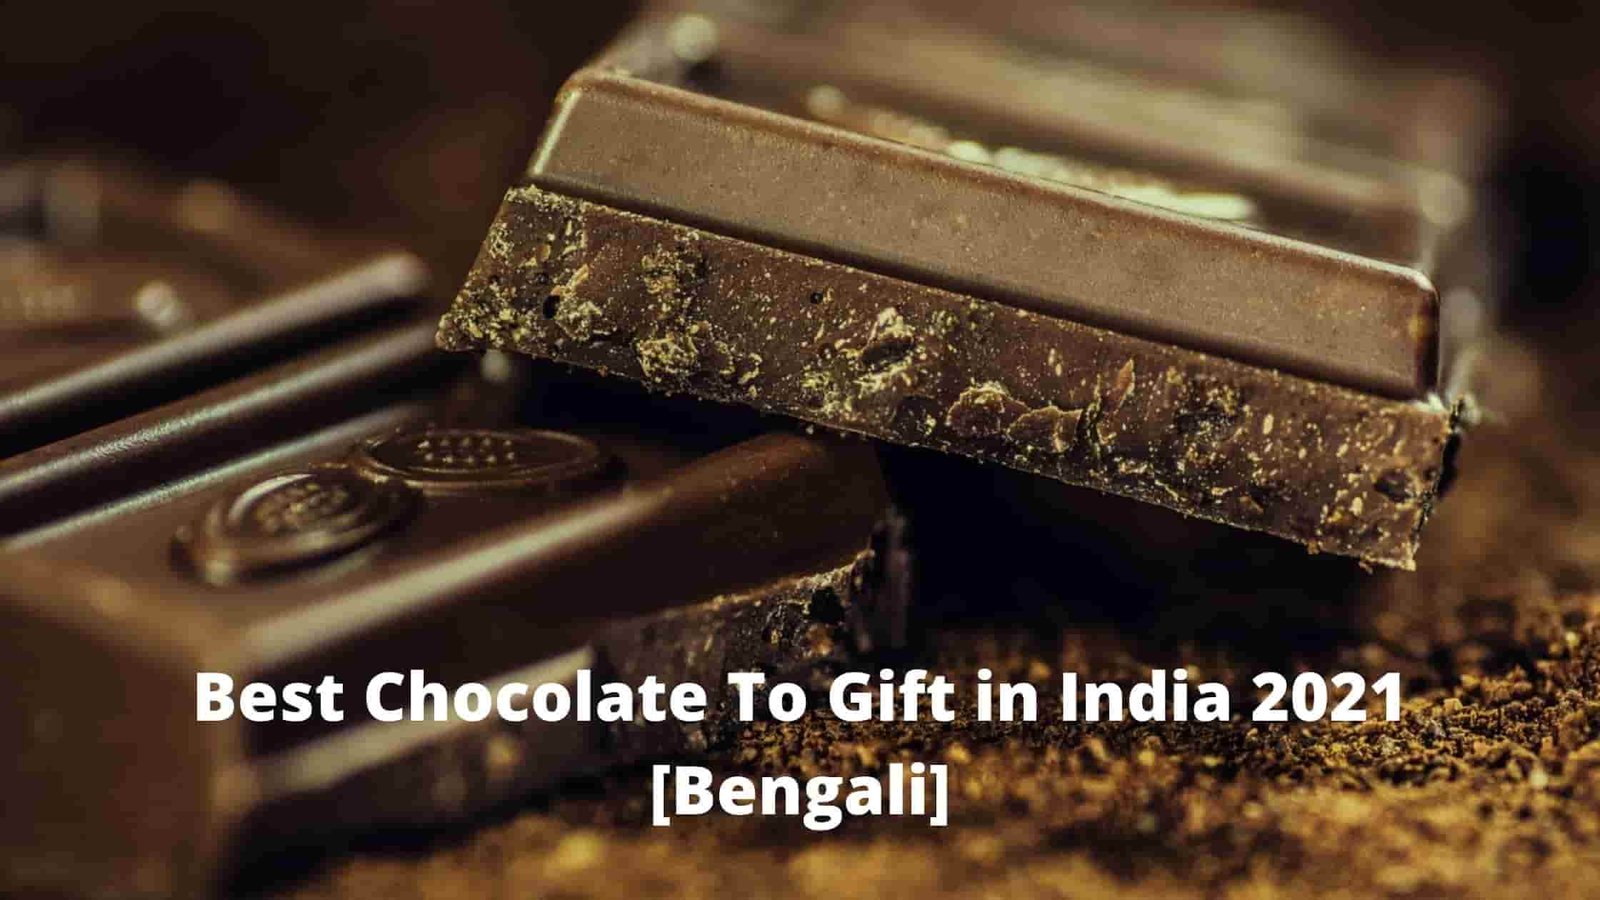 Best Chocolate To Gift in India 2021 [Bengali]